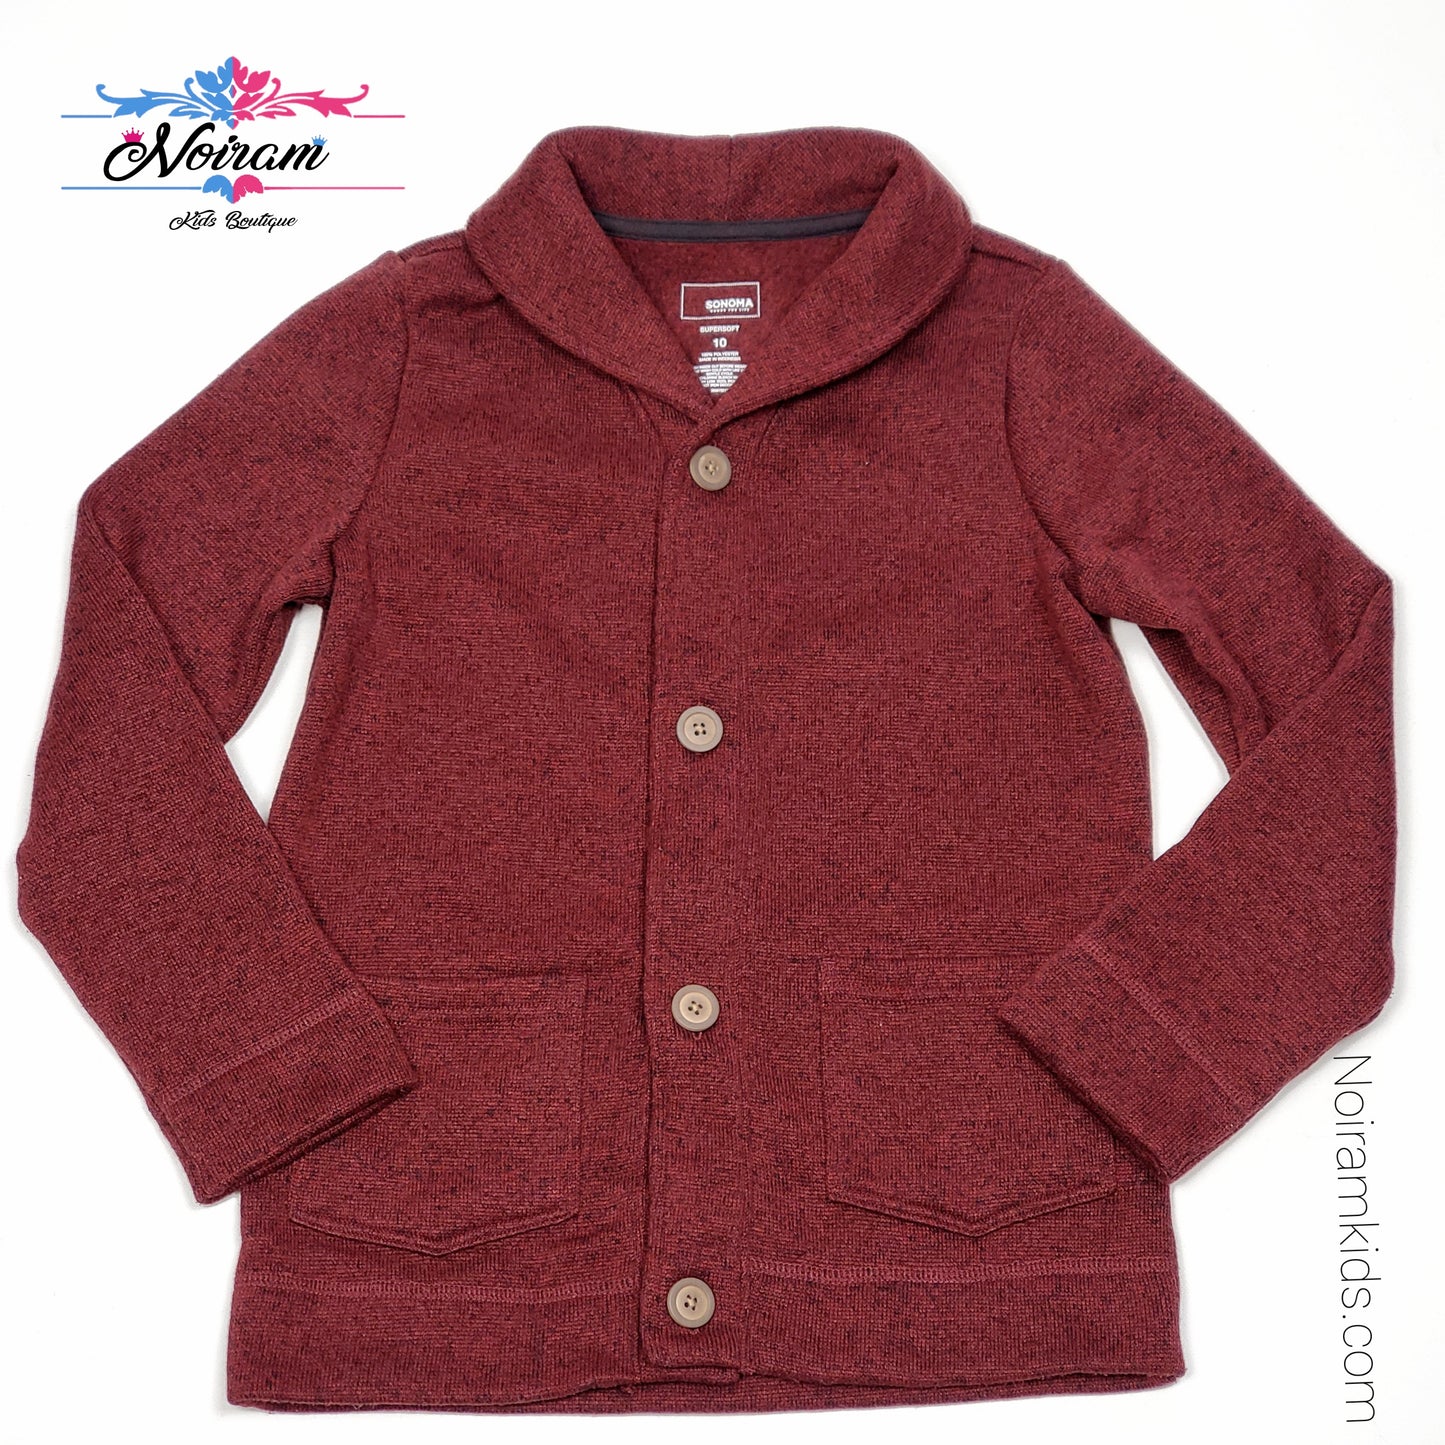 Sonoma Maroon Boys Cardigan Sweater Size 10 Used View 1